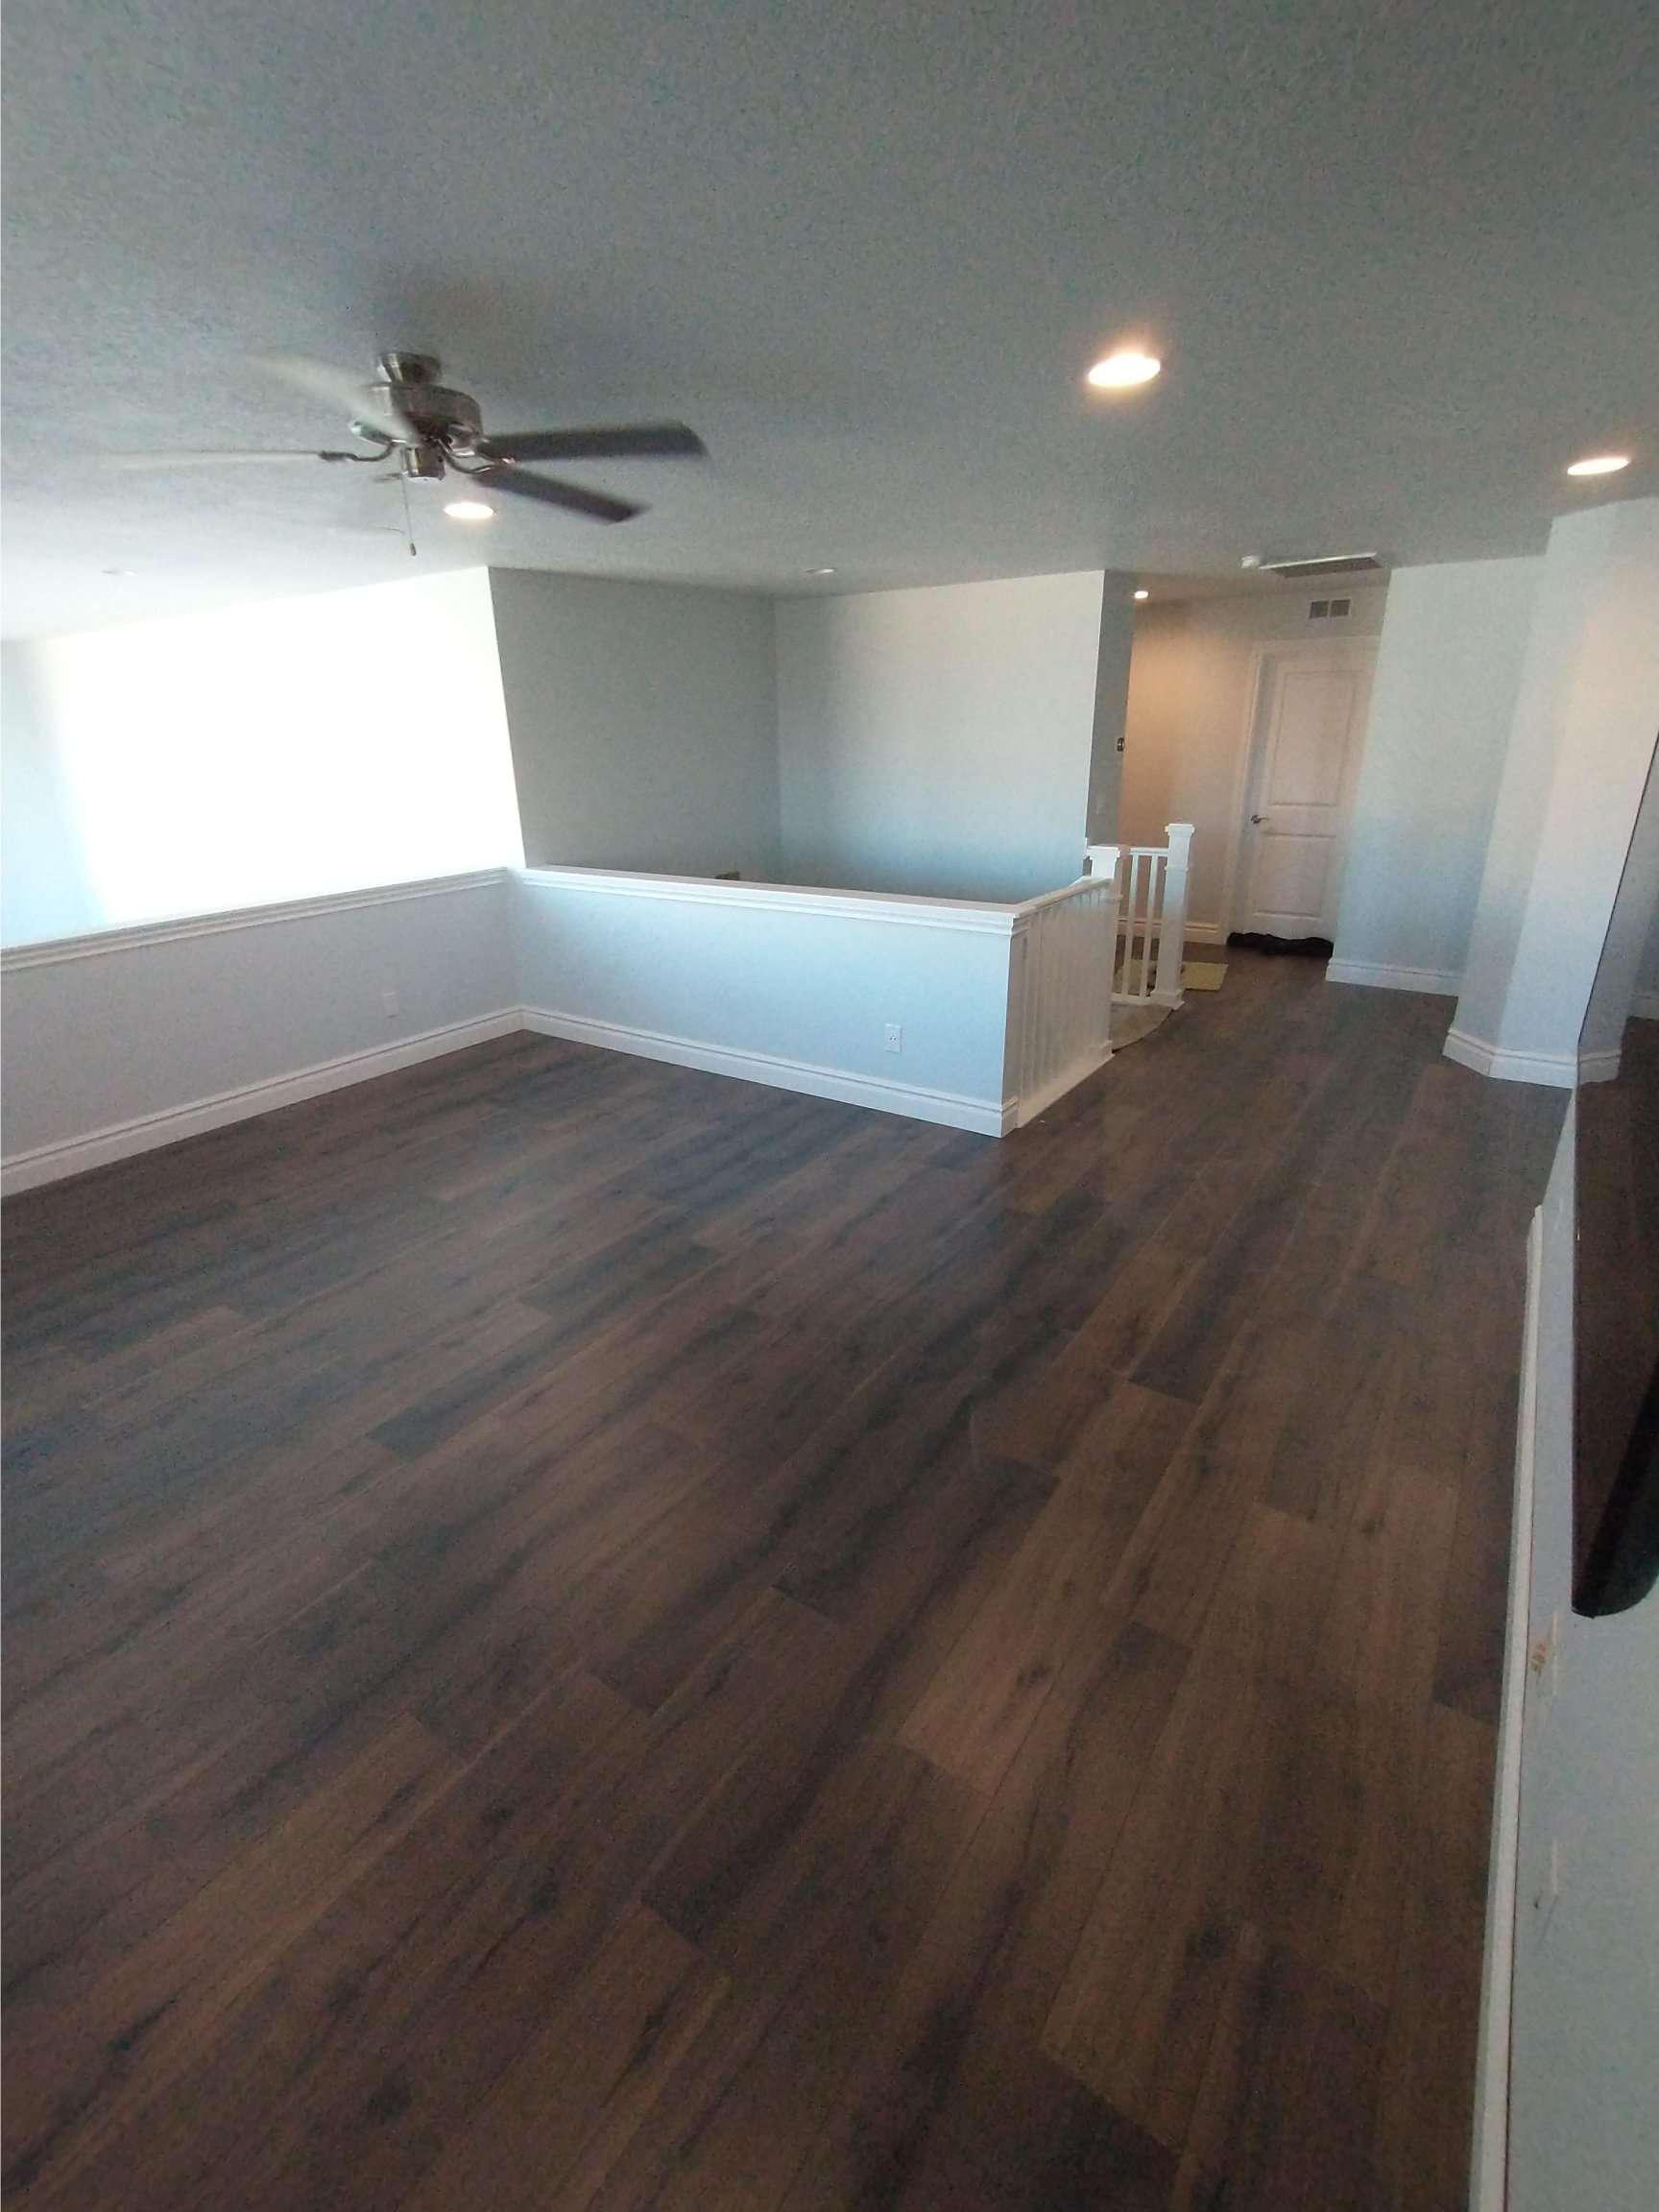 This looks great!! This project we did out in Tempe was a fun one! We installed about 1900 feet of this Laminate and love how it looks in this house. In this project we removed carpet and replaced it with Laminate. Call Home Solutionz Today For Your Flooring Project <(623) 289-3880>. Home Solutionz - Tempe is Licensed, Bonded, and Insured. Home Solutionz offers 12 - 24 Months 0% Financing Through Wells Fargo. Home Solutionz Tempe - 3125 S 52nd St, Suite 107 Tempe, AZ 85282 United States  Laminate  FloorInstallation  Flooring